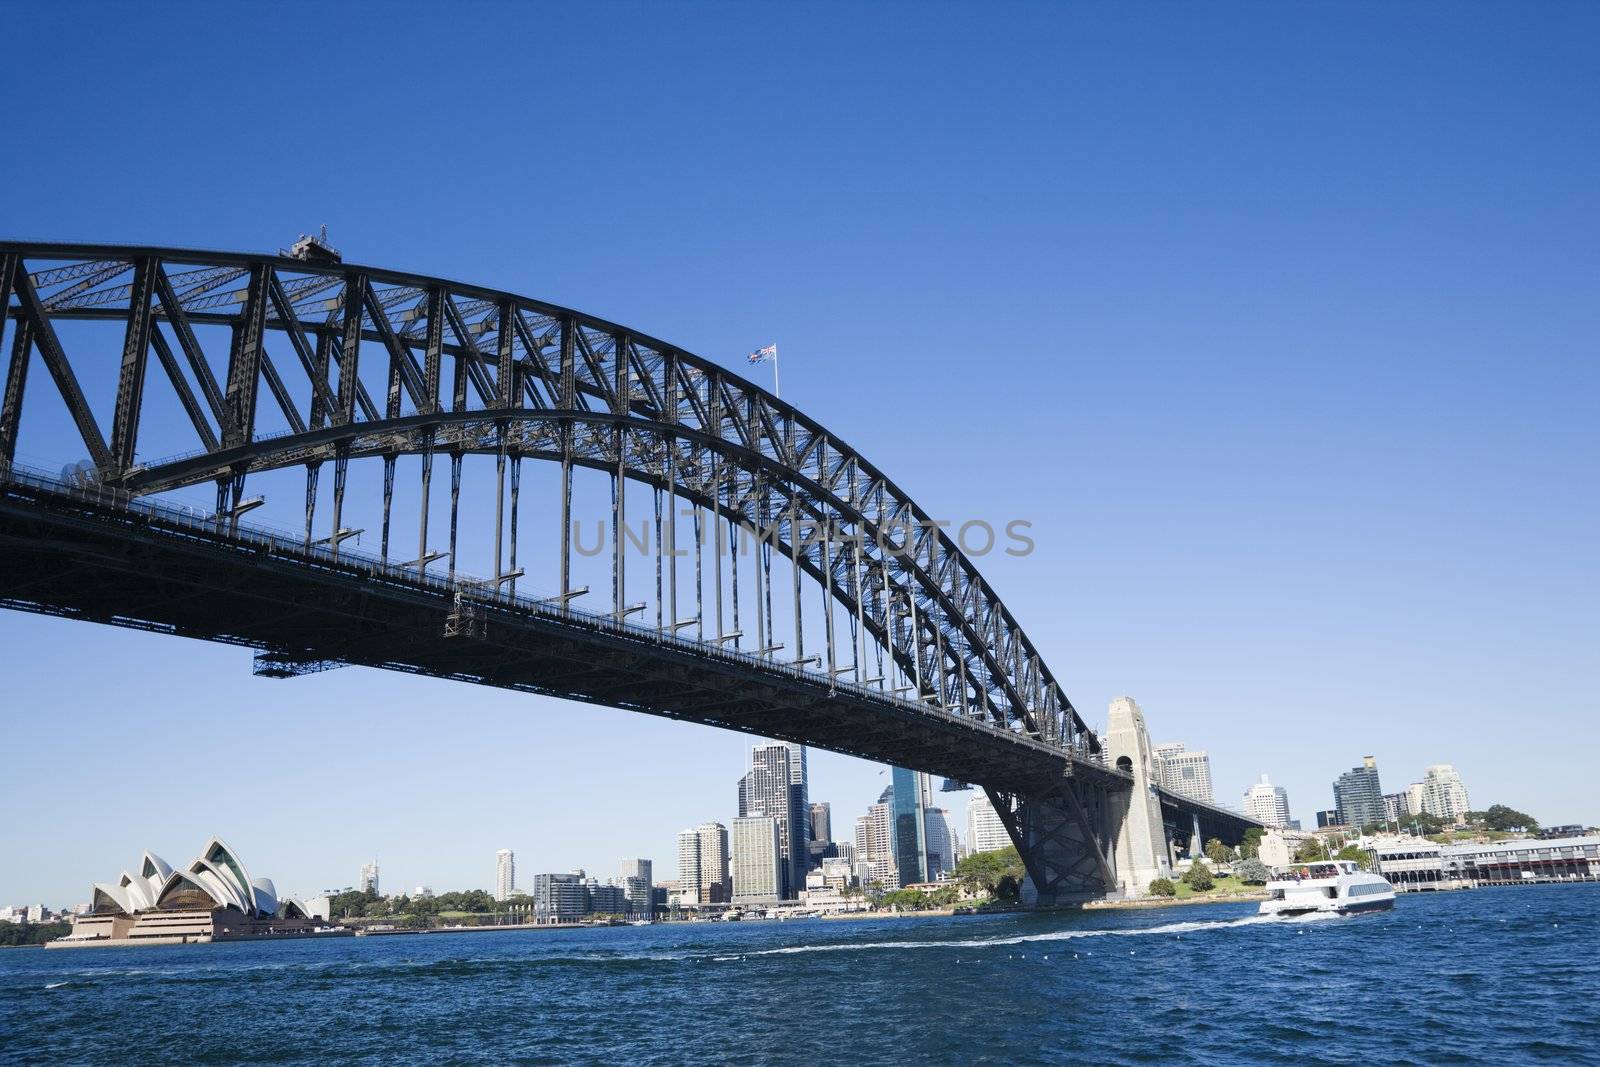 Sydney Harbour Bridge with view of downtown buildings and Sydney Opera House in Australia.